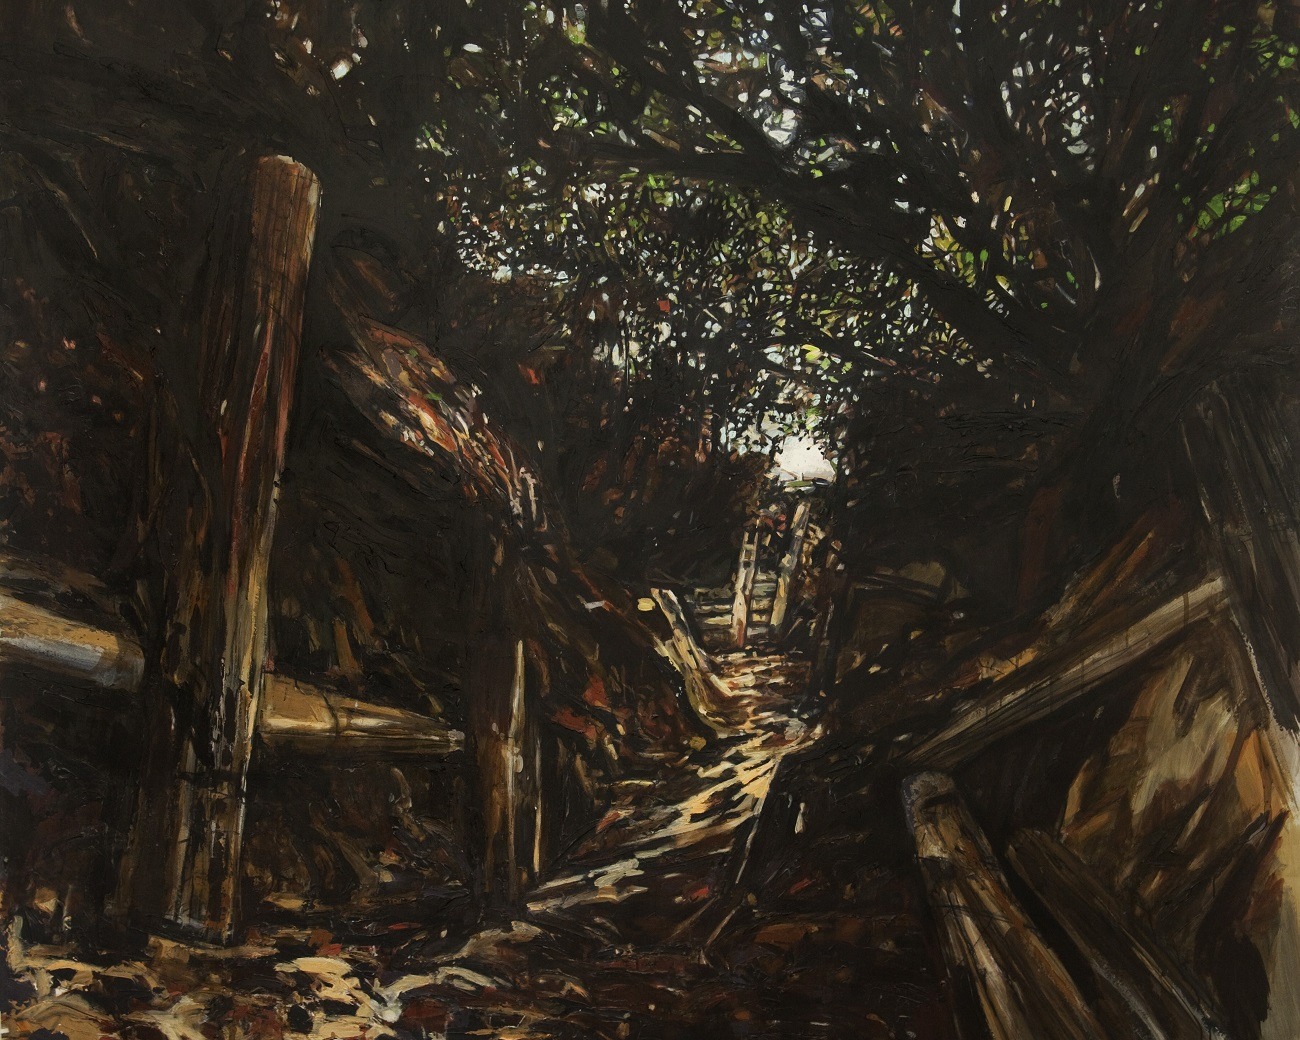 Lev Vykopal, Entrance to Hades (Lone Pine), 2014, soil, pigment, acrylic, charcoal and shellac on paper, 260 x 240cm